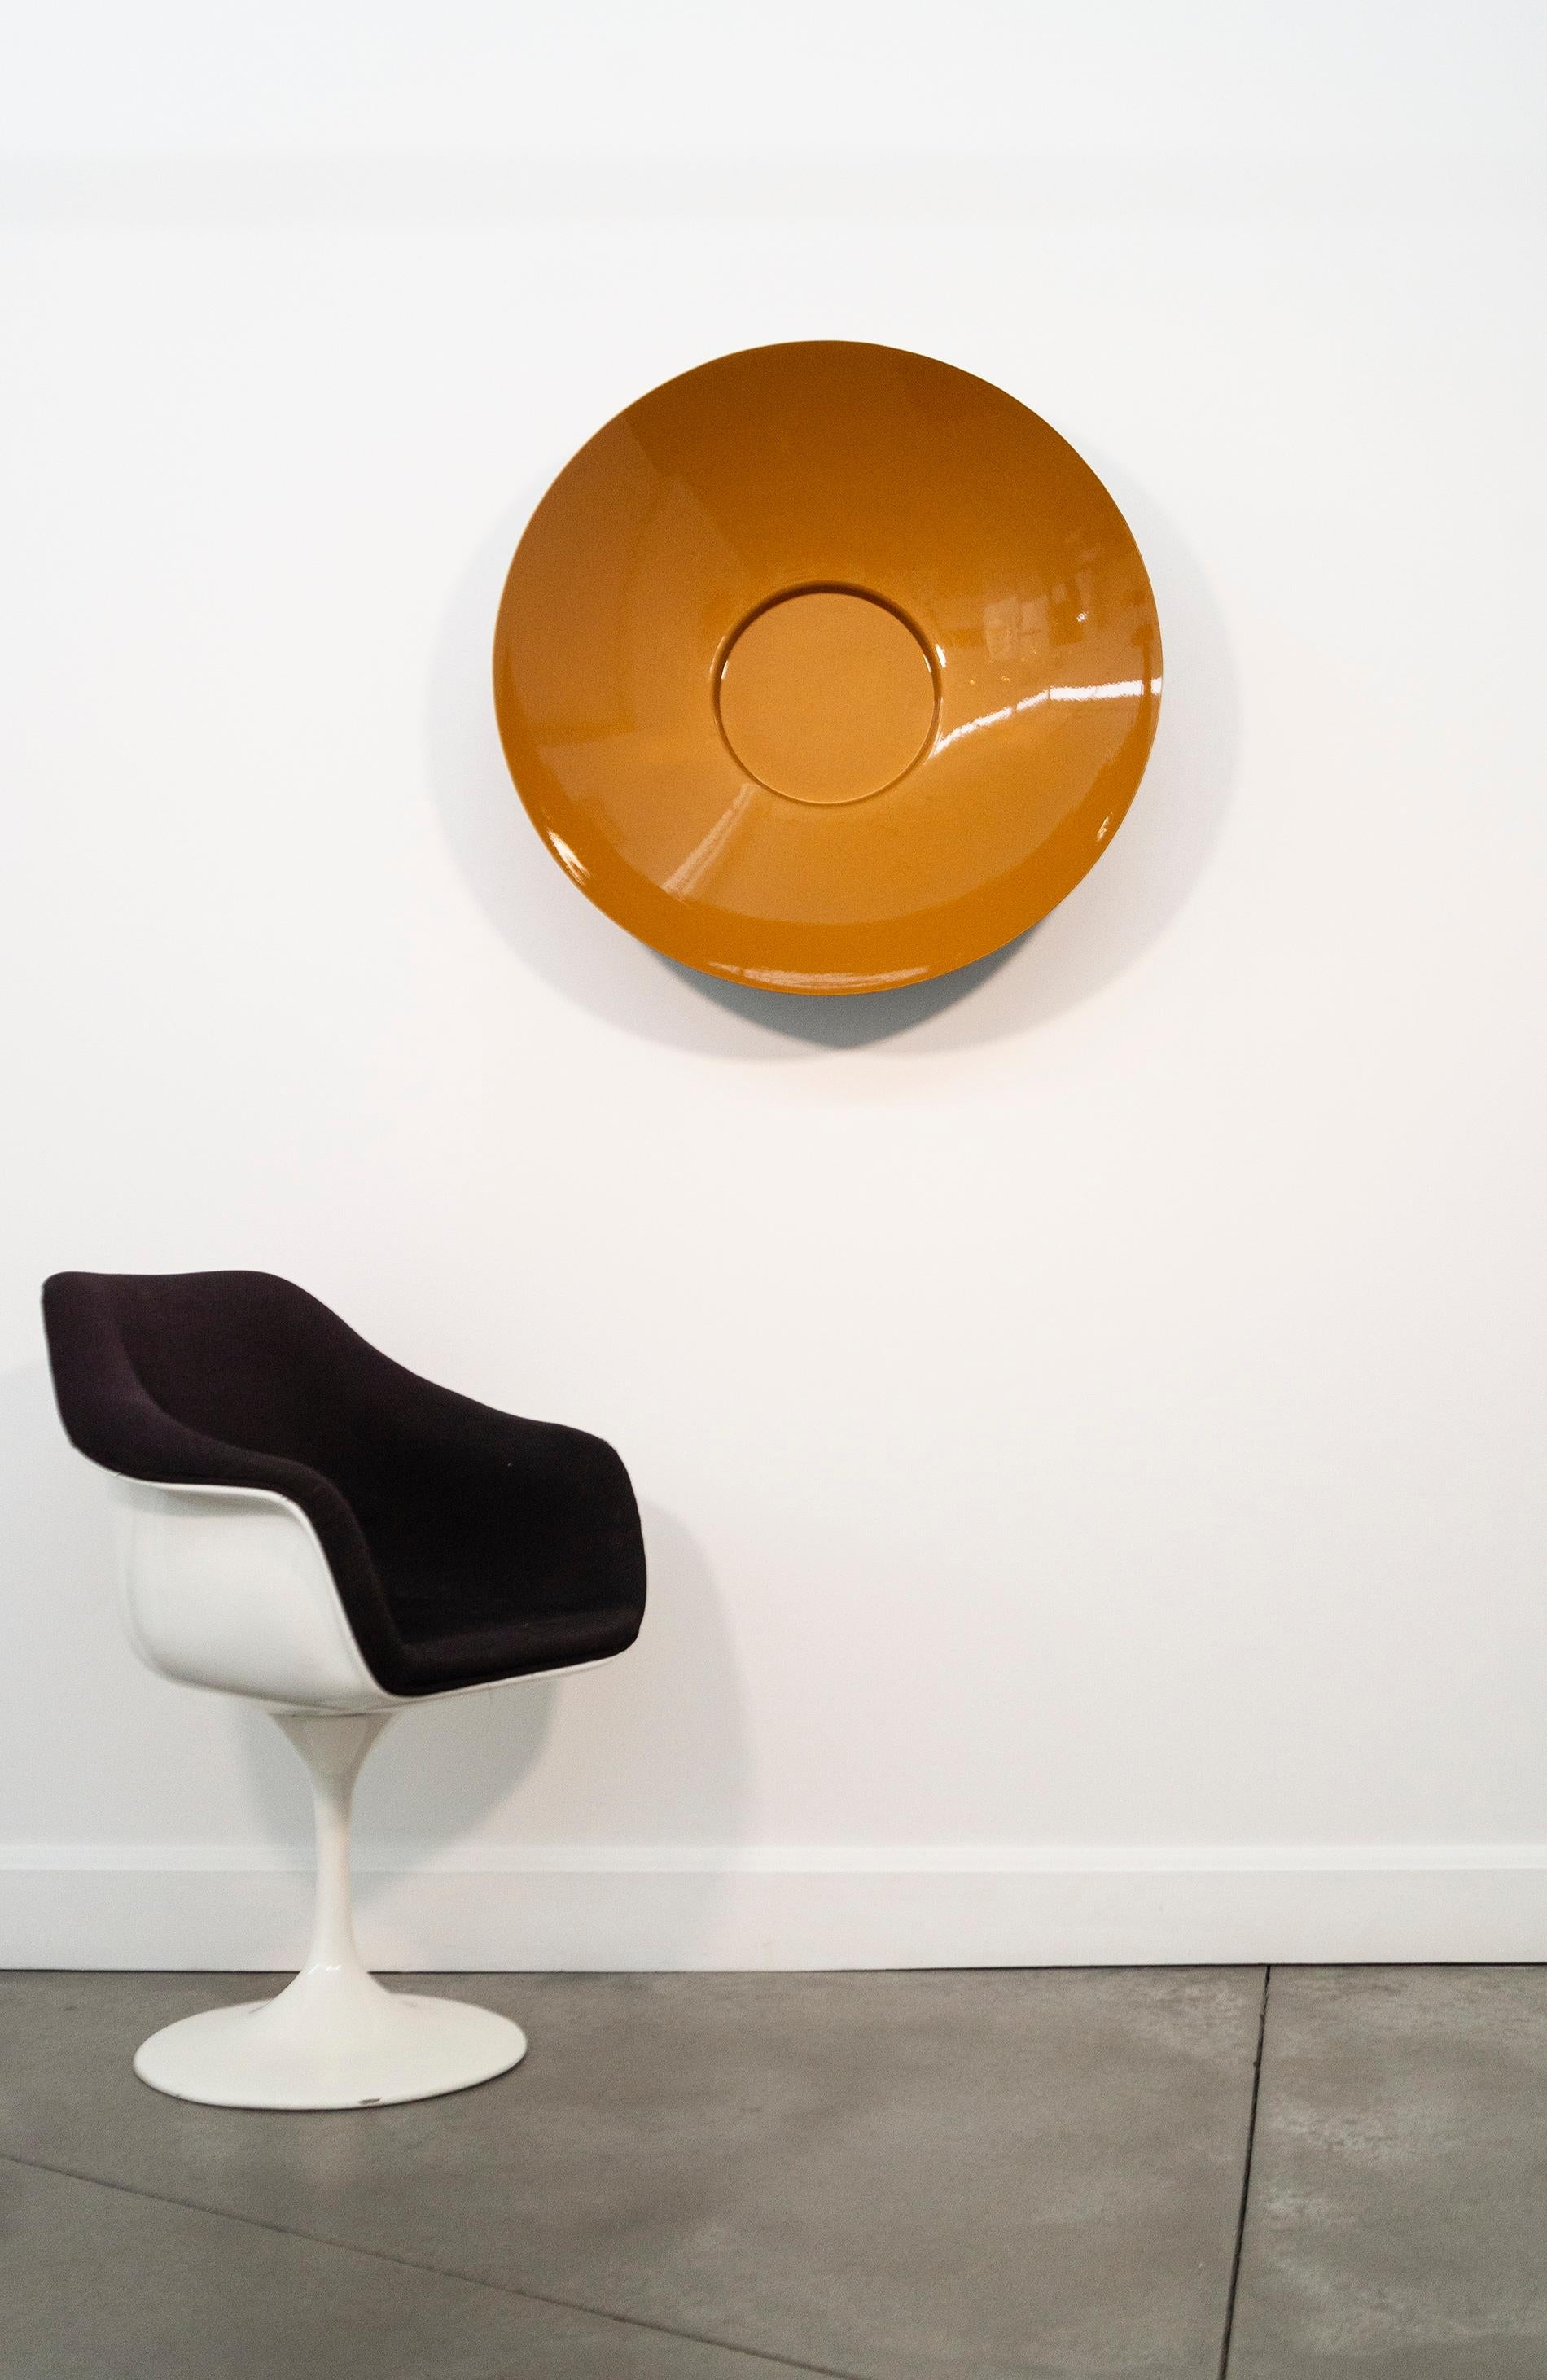 Singing Vessel Citrine Gold 32 - circular, contemporary, steel wall sculpture - Abstract Geometric Sculpture by Marlene Hilton Moore